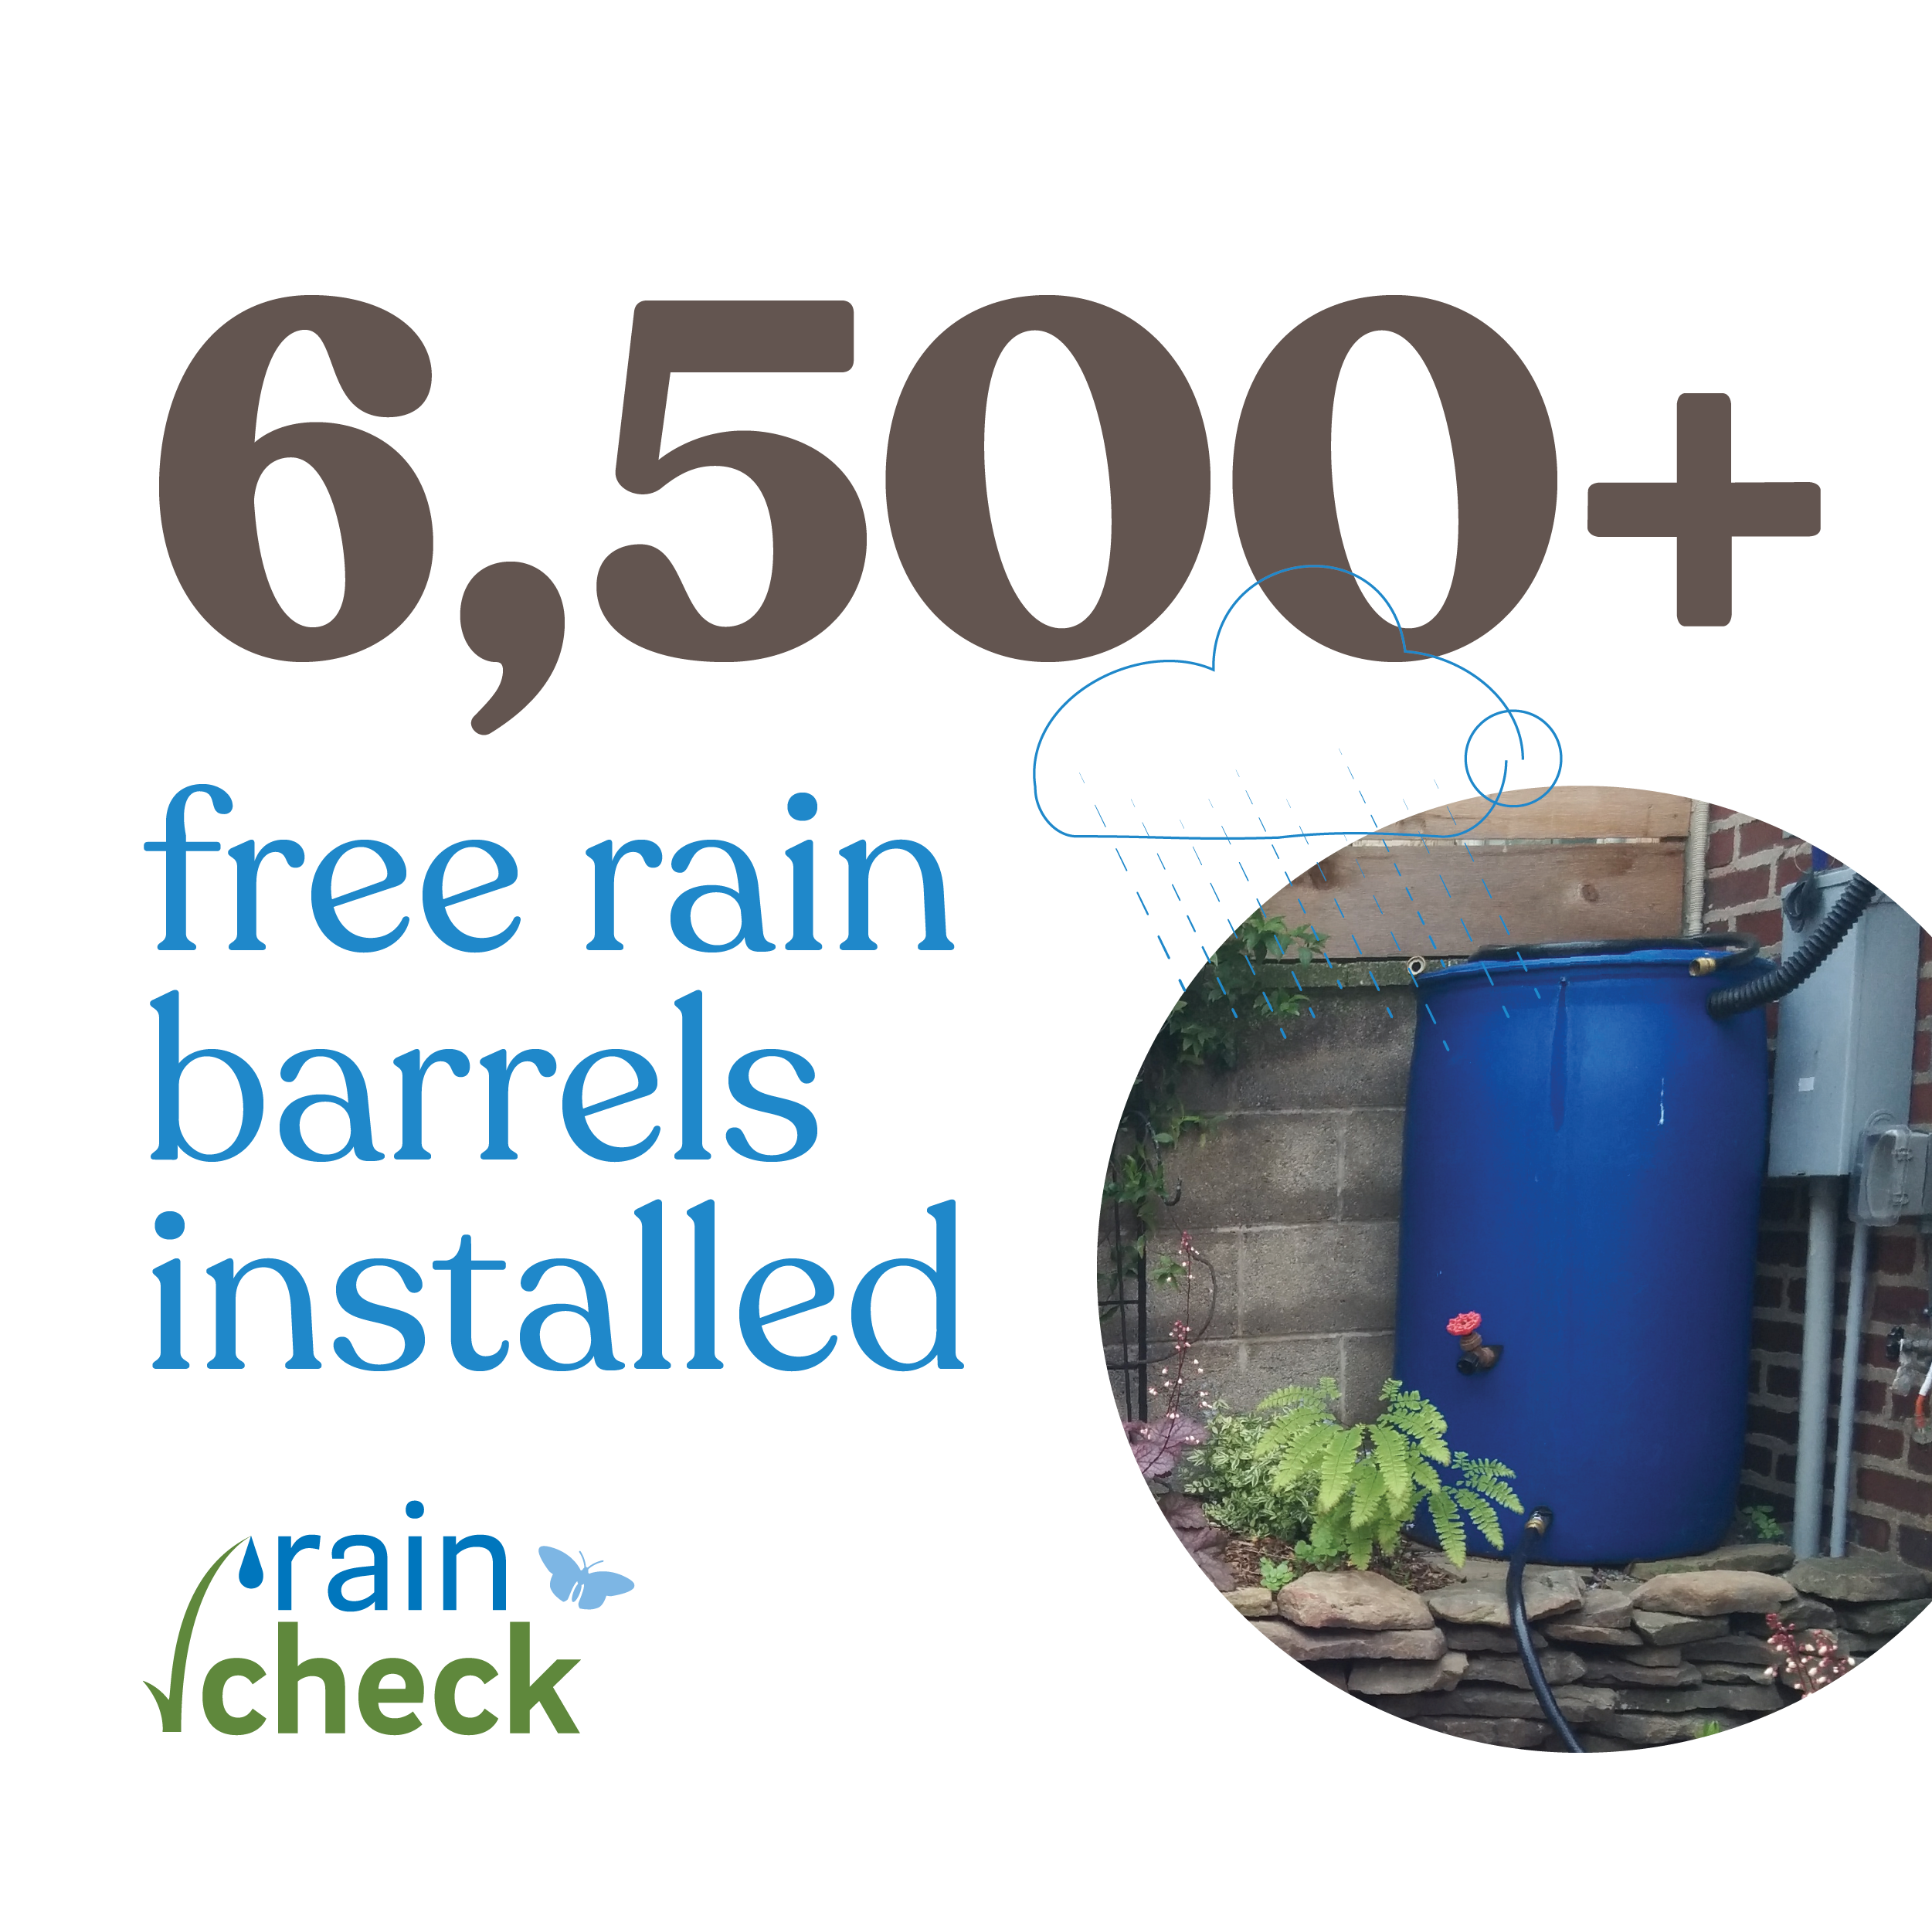 Over 6500 free rain barrels have been installed as part of the Rain Check program to date.